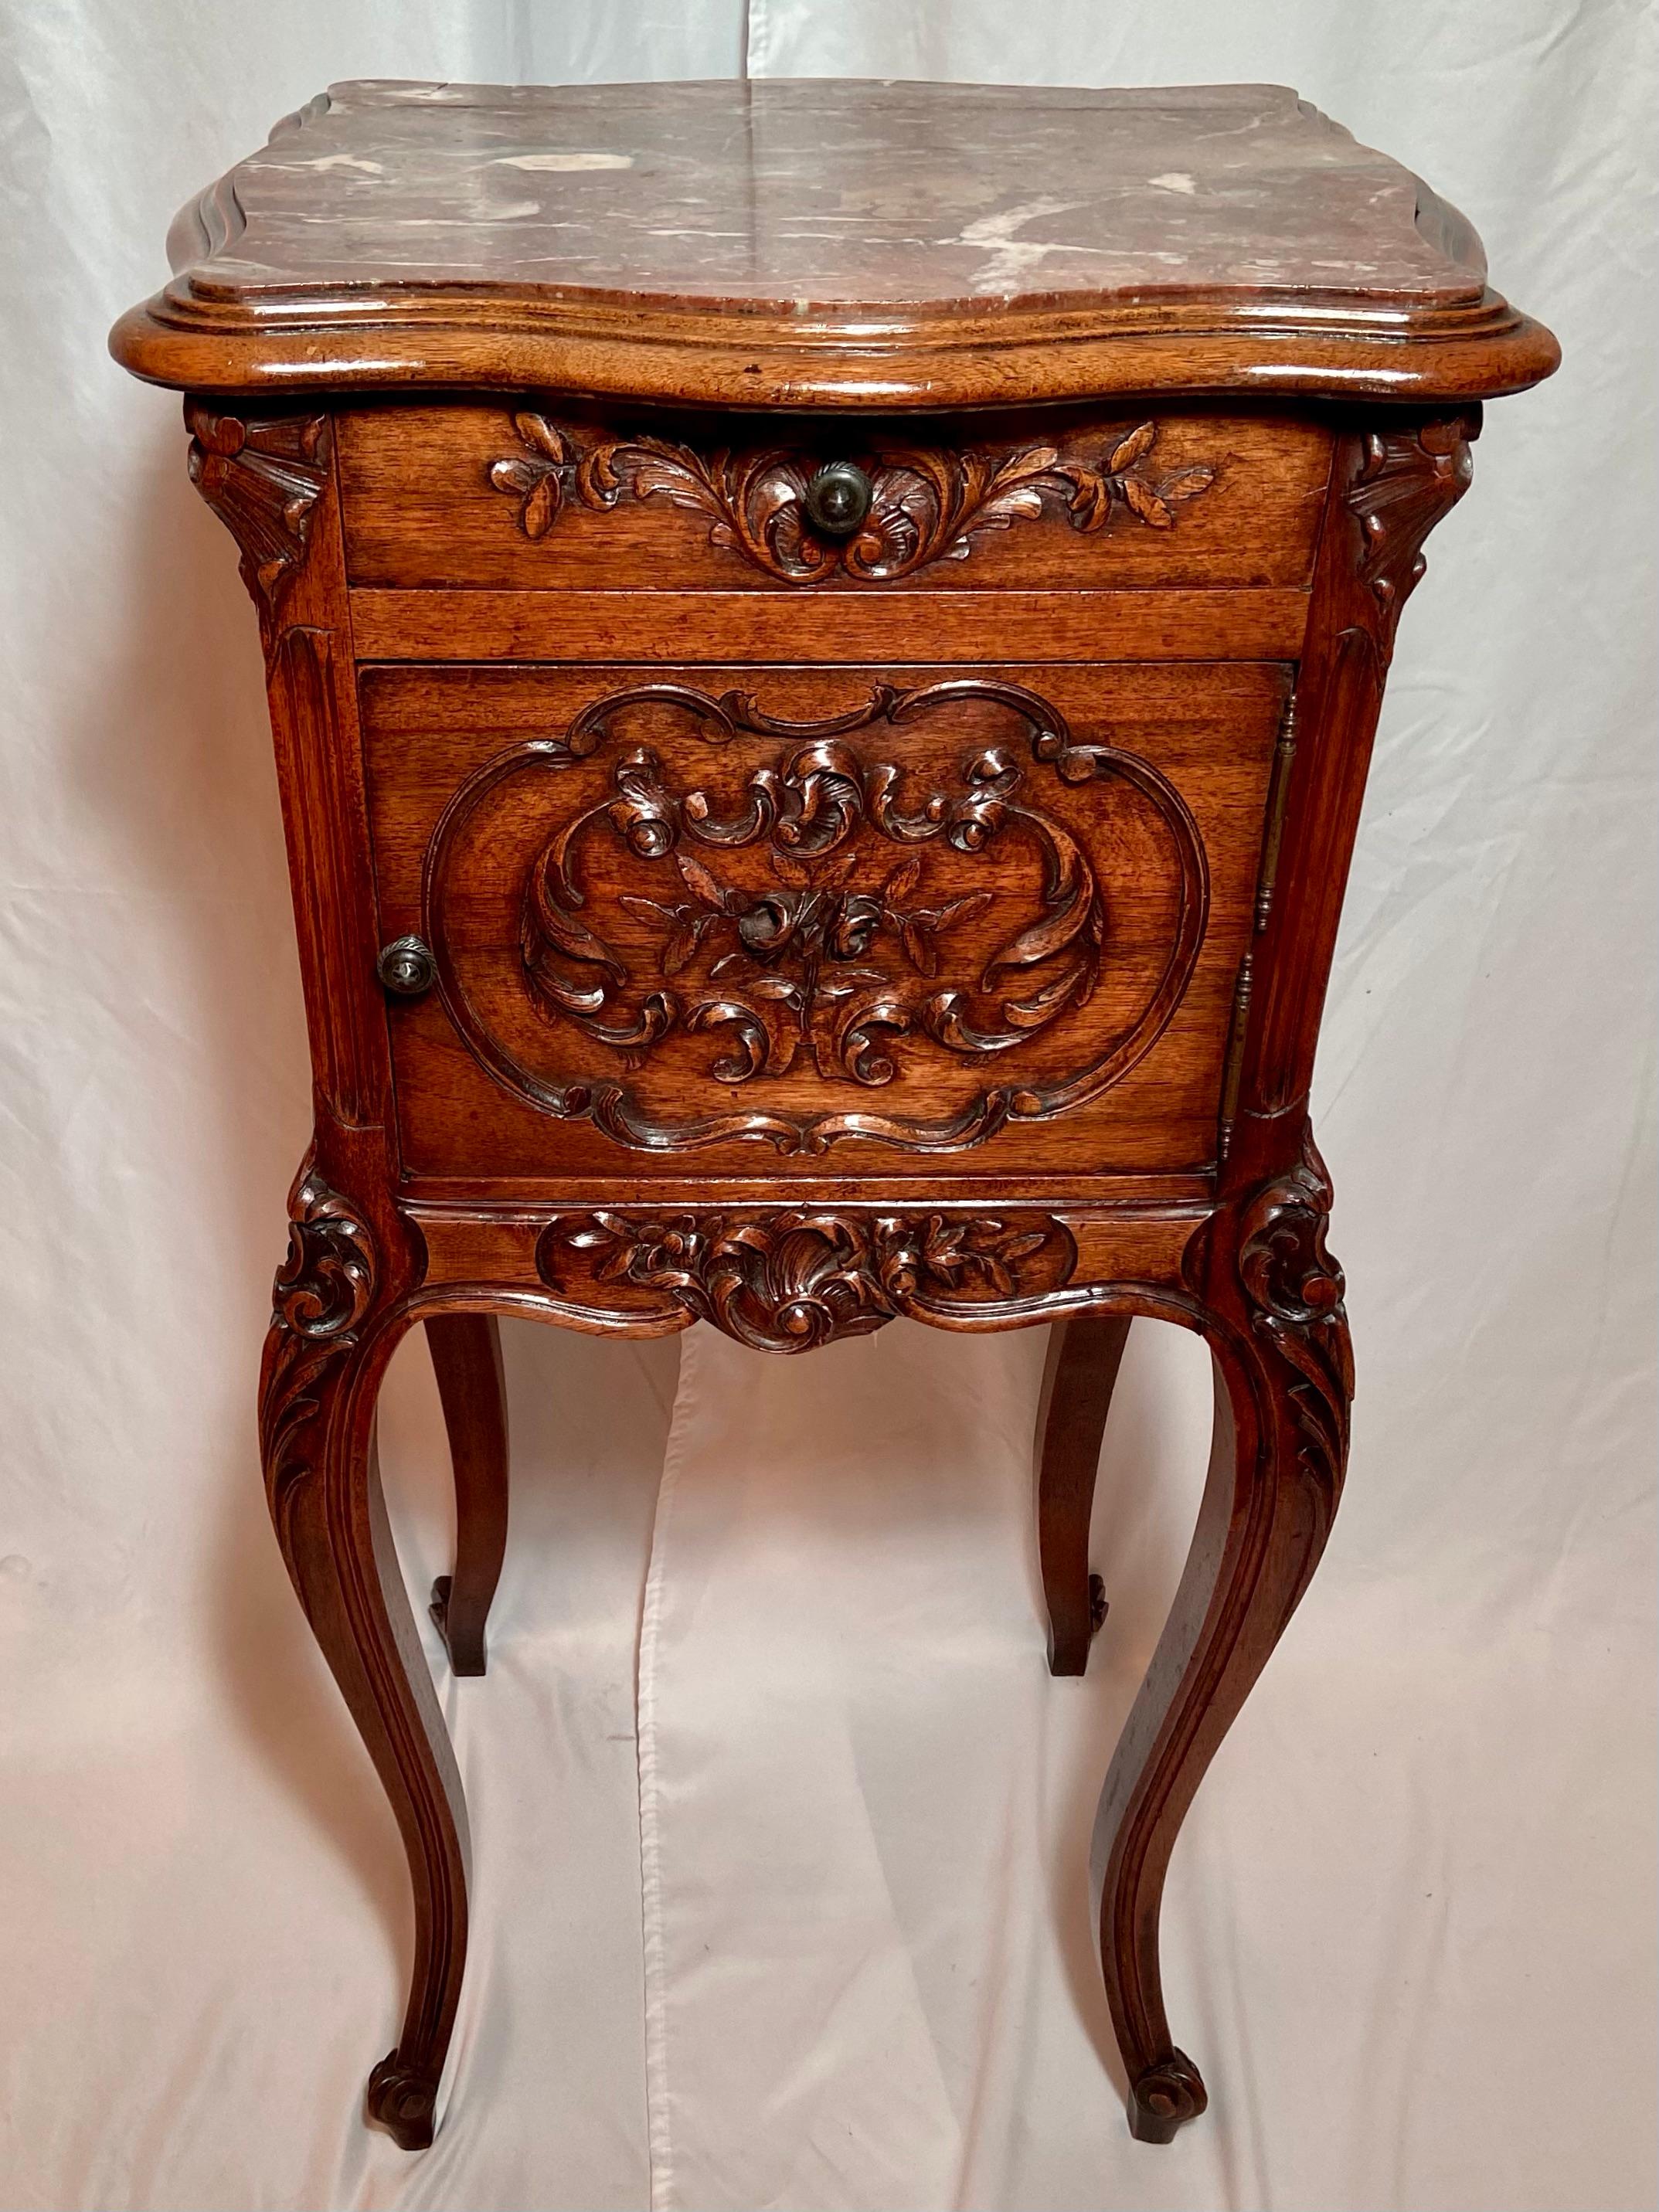 Antique French carved walnut occasional/night table, Circa 1890.